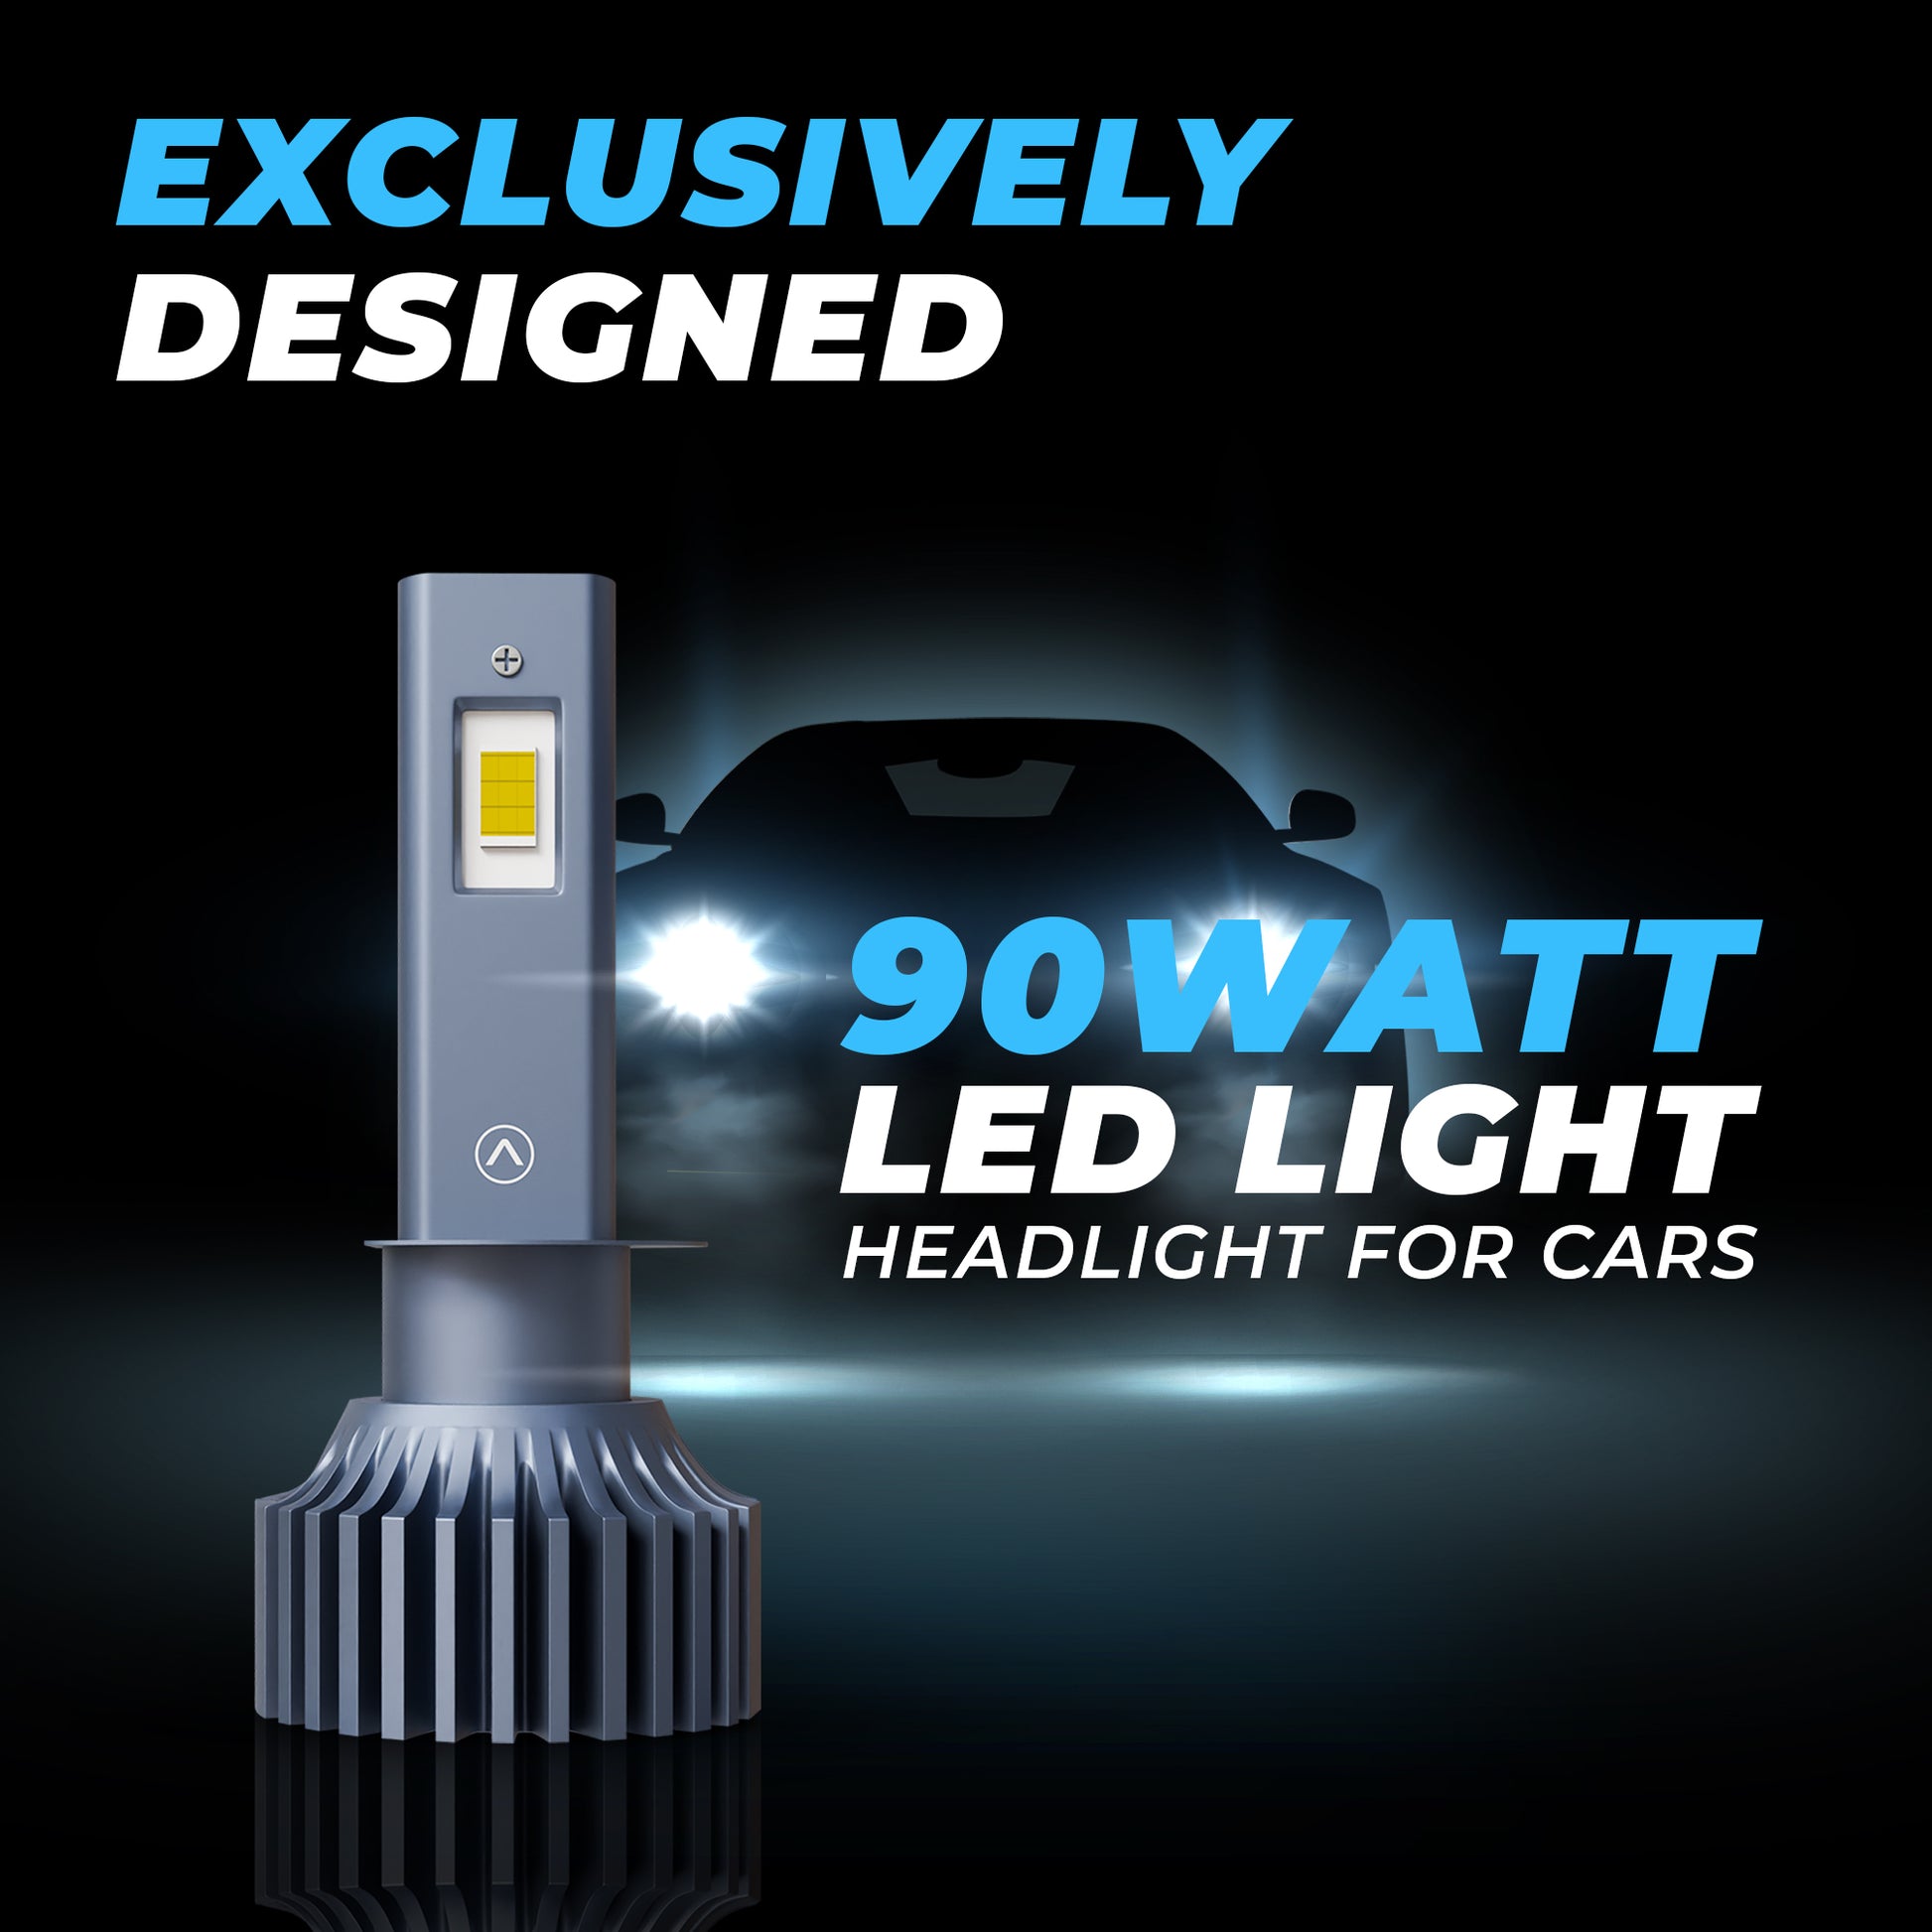 JCBL ACCESSORIES Lumenz H1 90W Car Headlight LED Bulb, 7200 Lumens Dual-Beam, 6000-6500K Day Light, Weather-Resistant IP67 Waterproof | Exclusively DESIGNED “ LED LIGHT | 90 WATT LED LIGHT HEADLIGHT FOR CARS